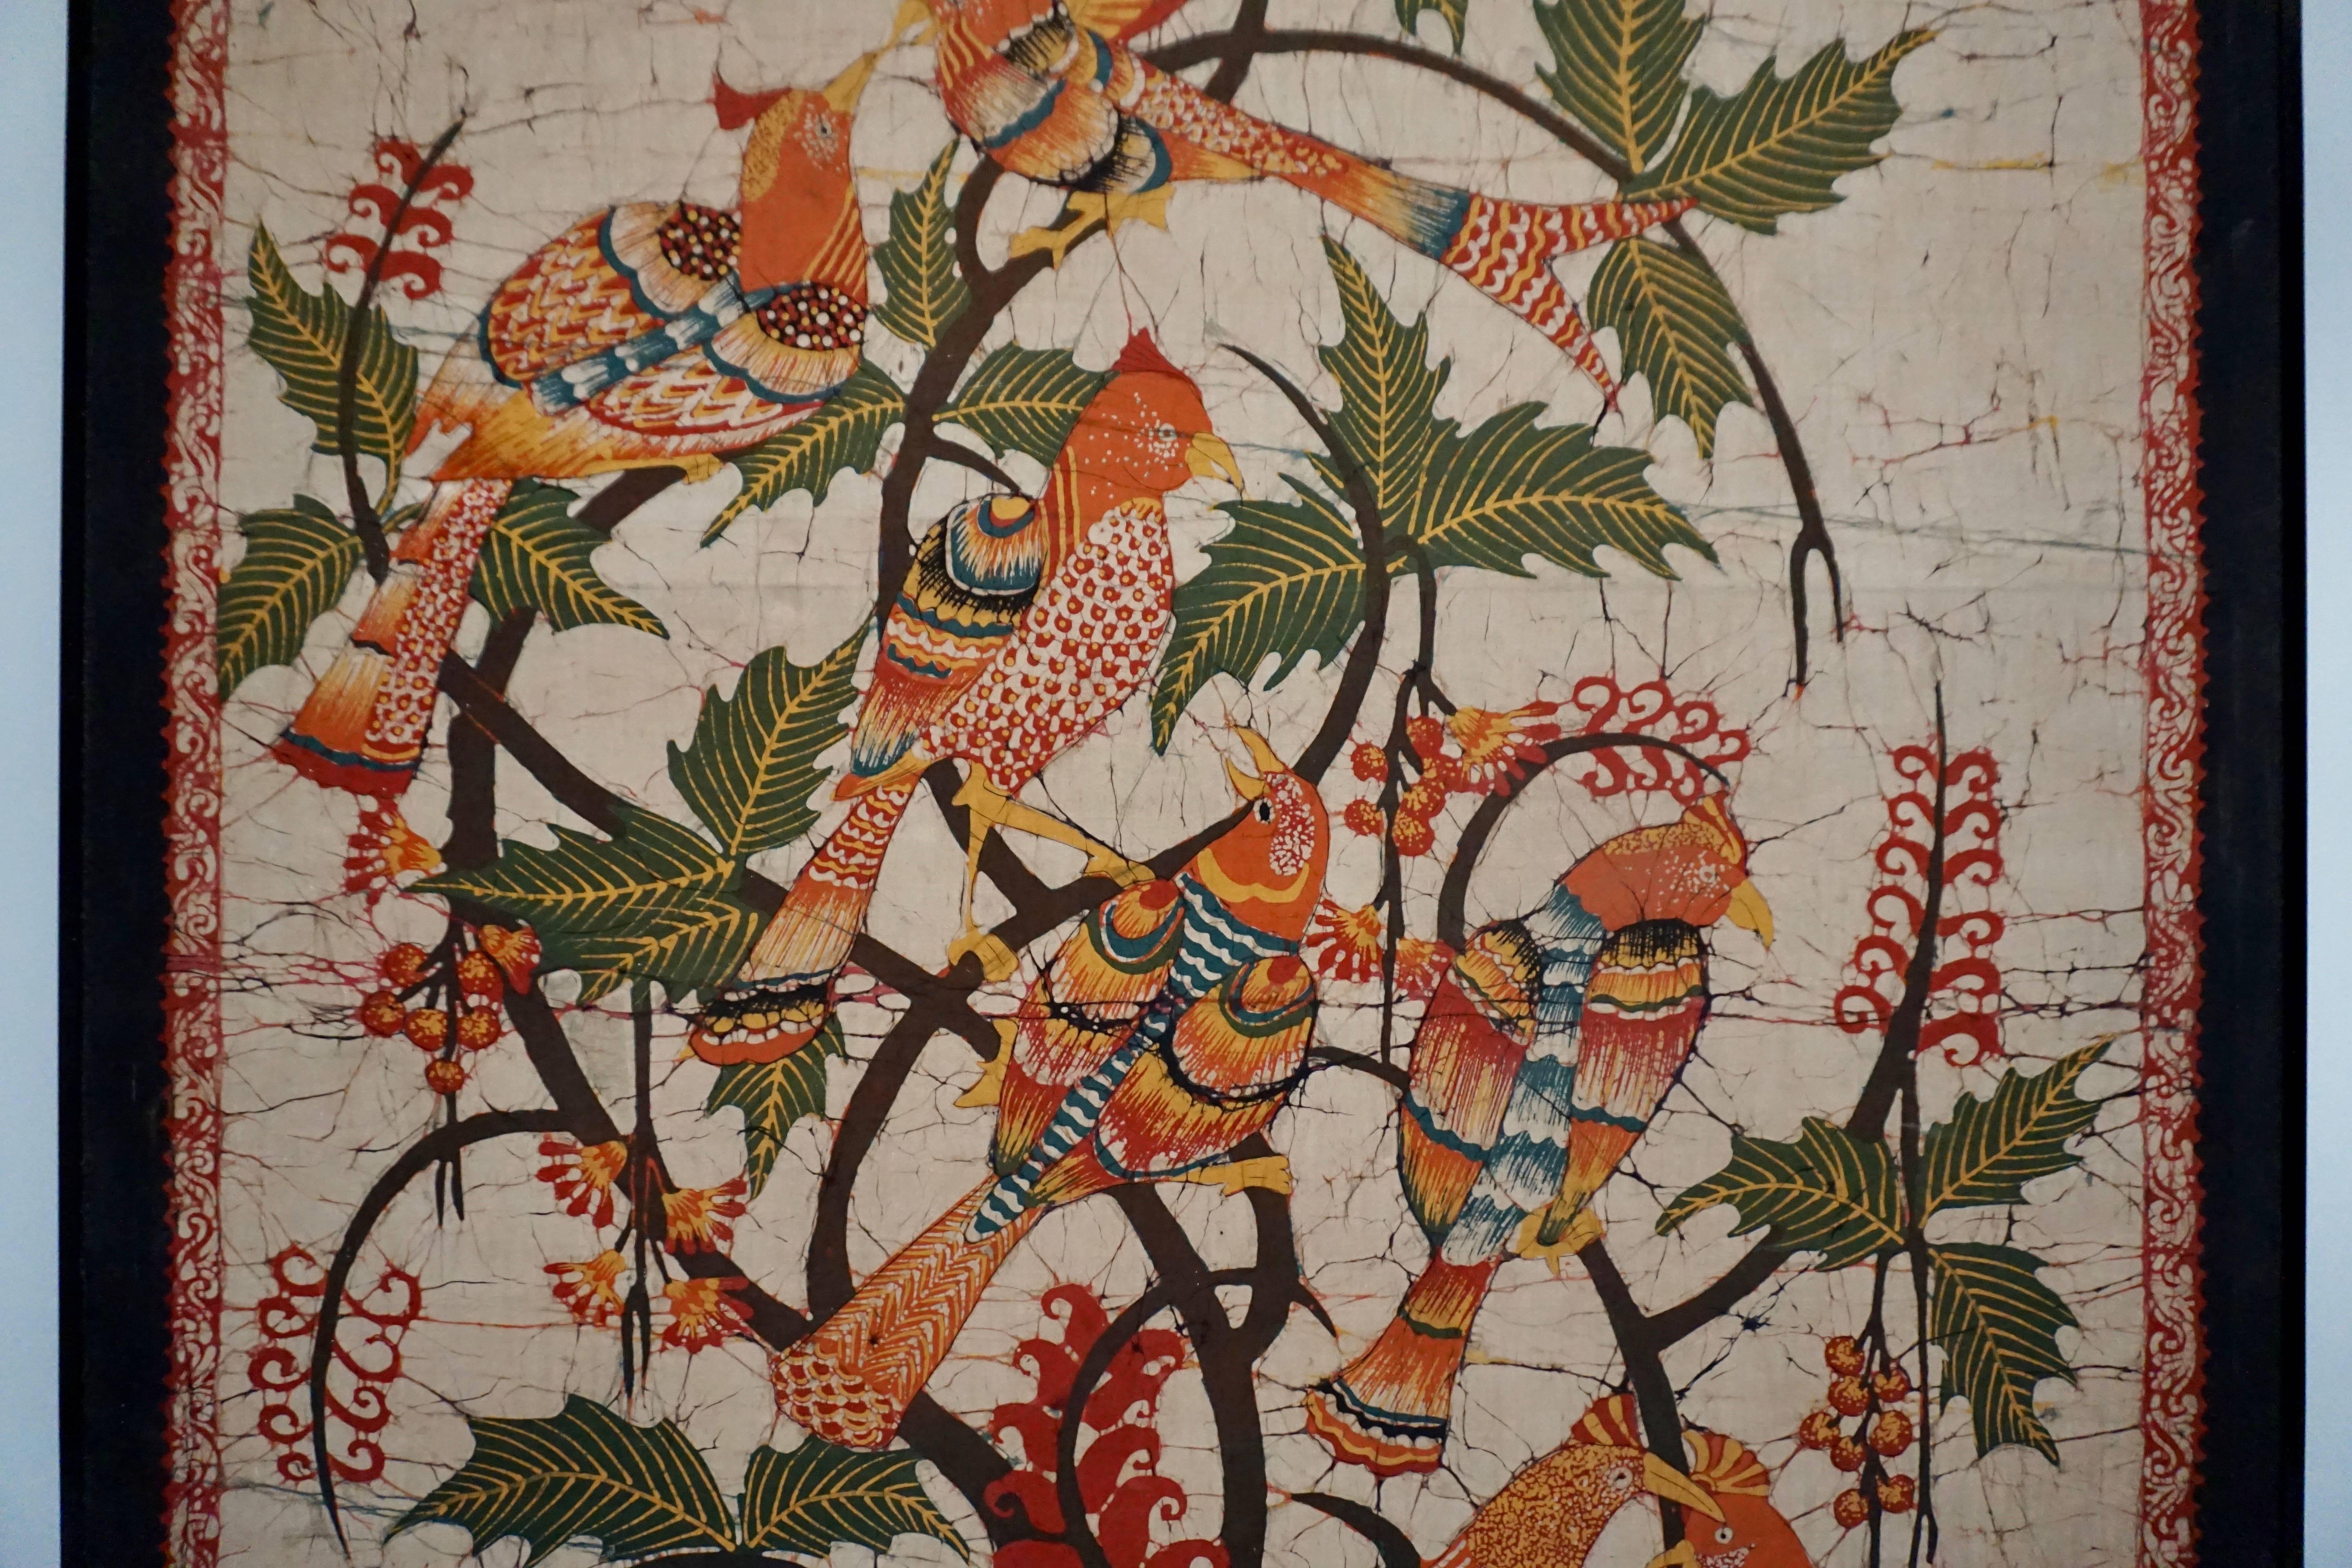 Indonesian Colorful Large Batik Fabric Painting with Birds